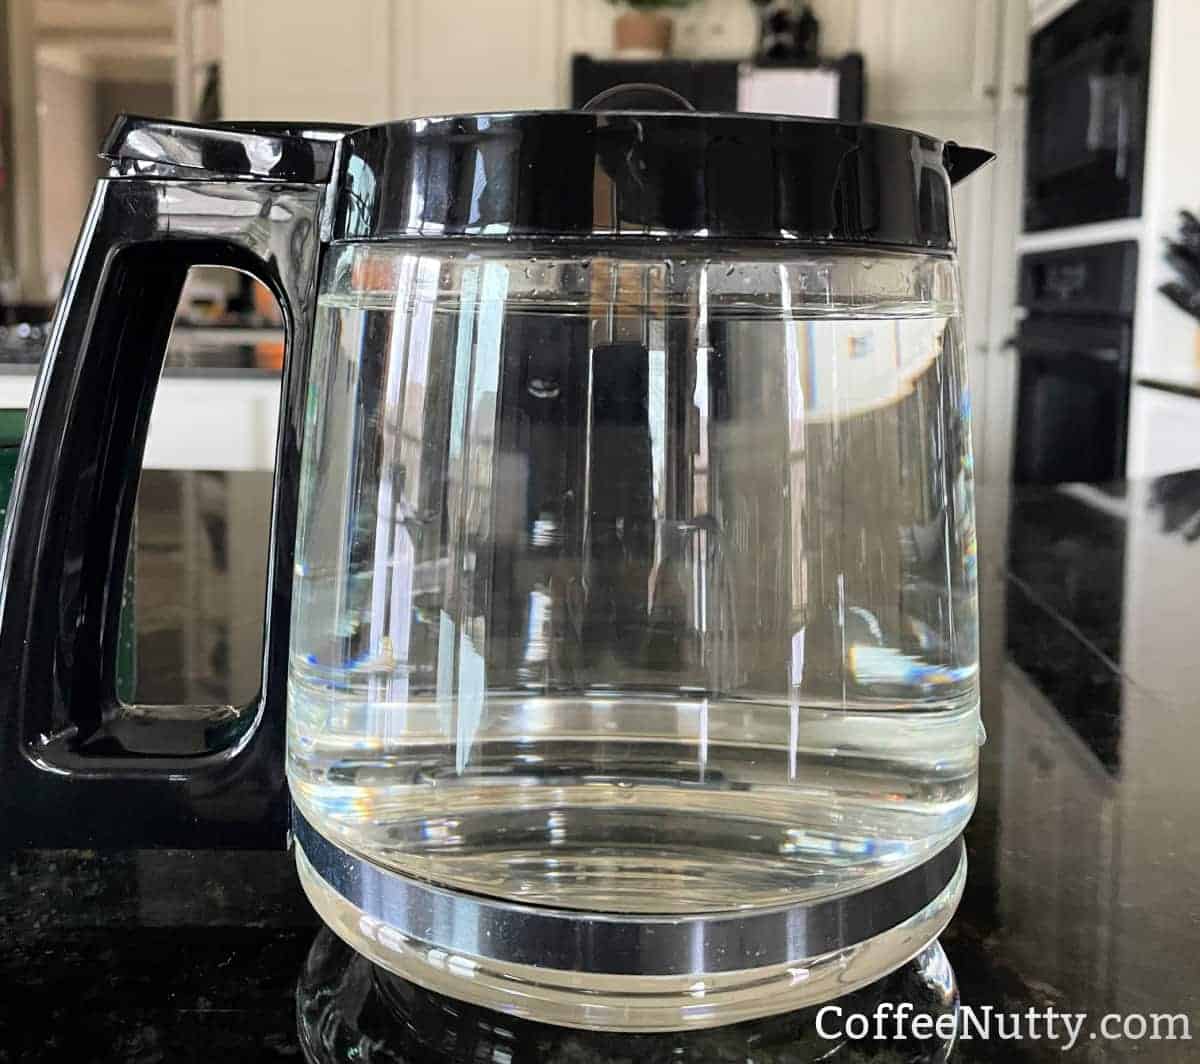 12-cup coffee pot filled with 60 ounces of water sitting on kitchen counter.